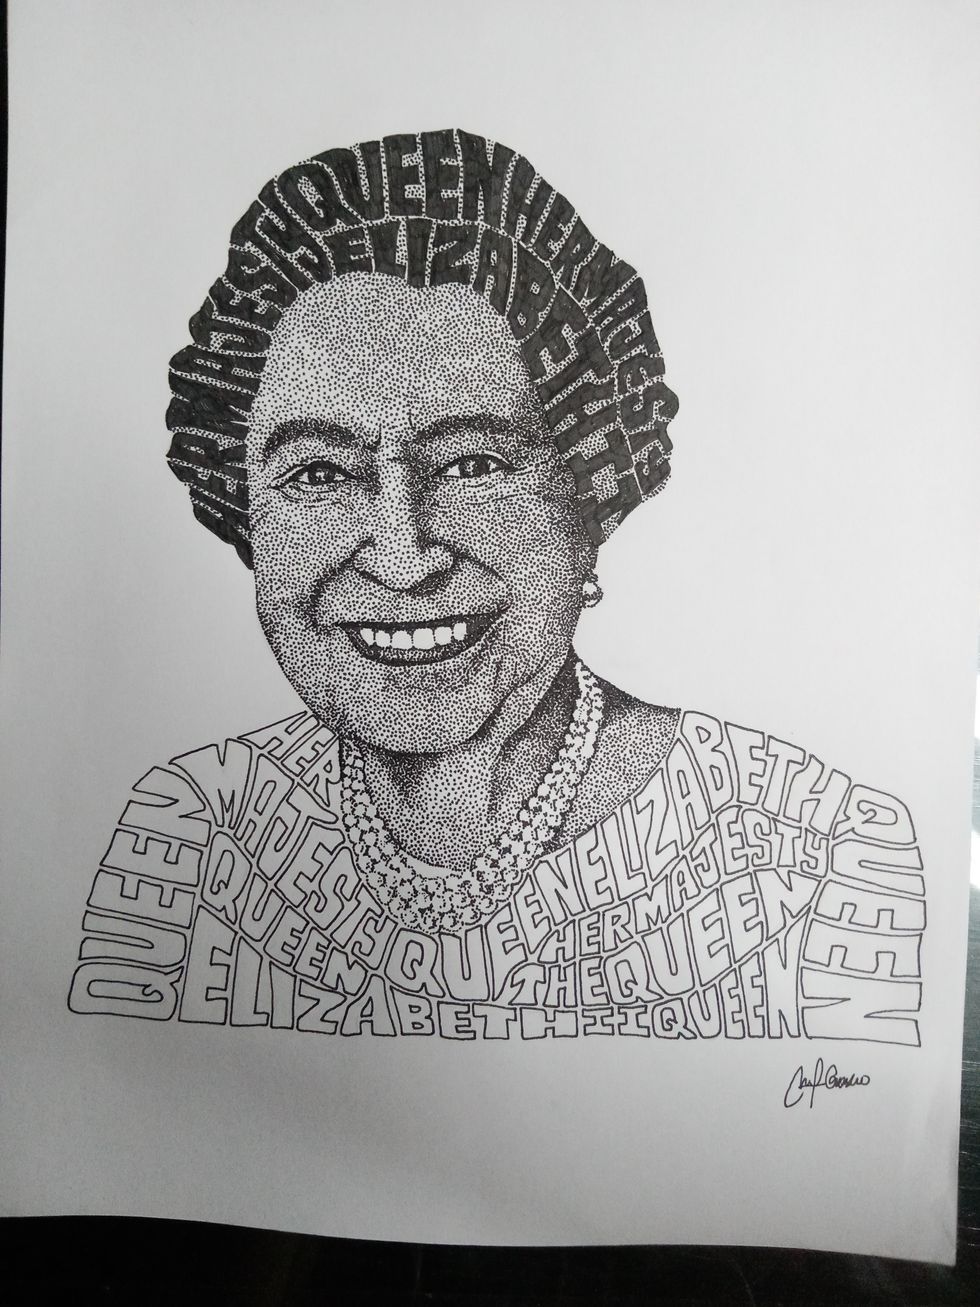 Artists around the world create tributes to the Queen